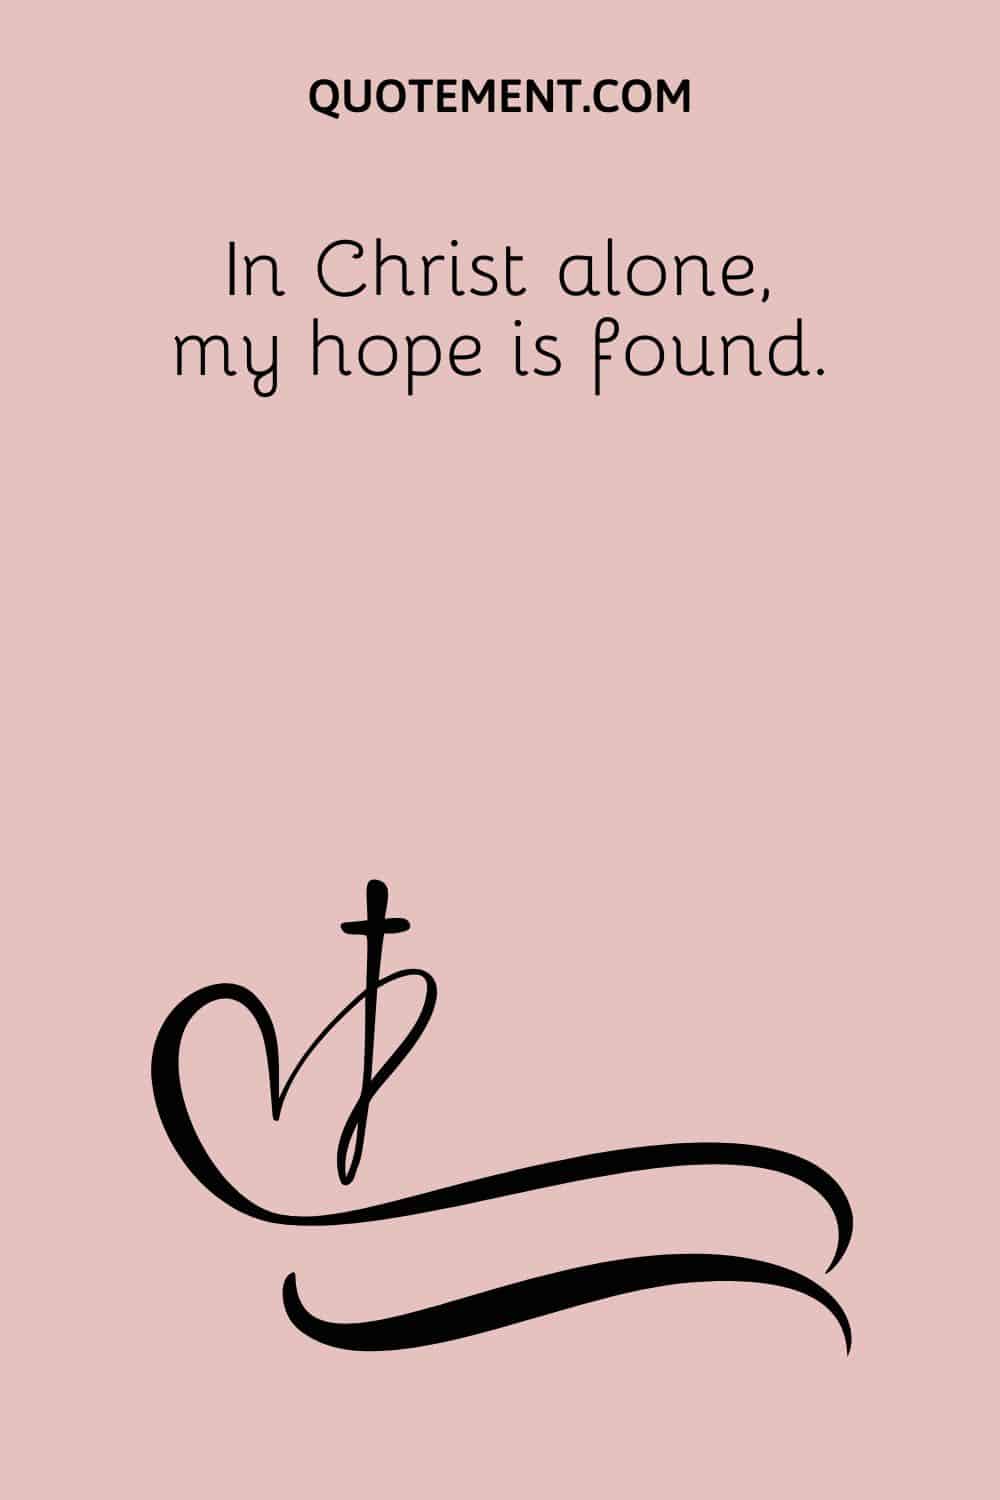 In Christ alone, my hope is found